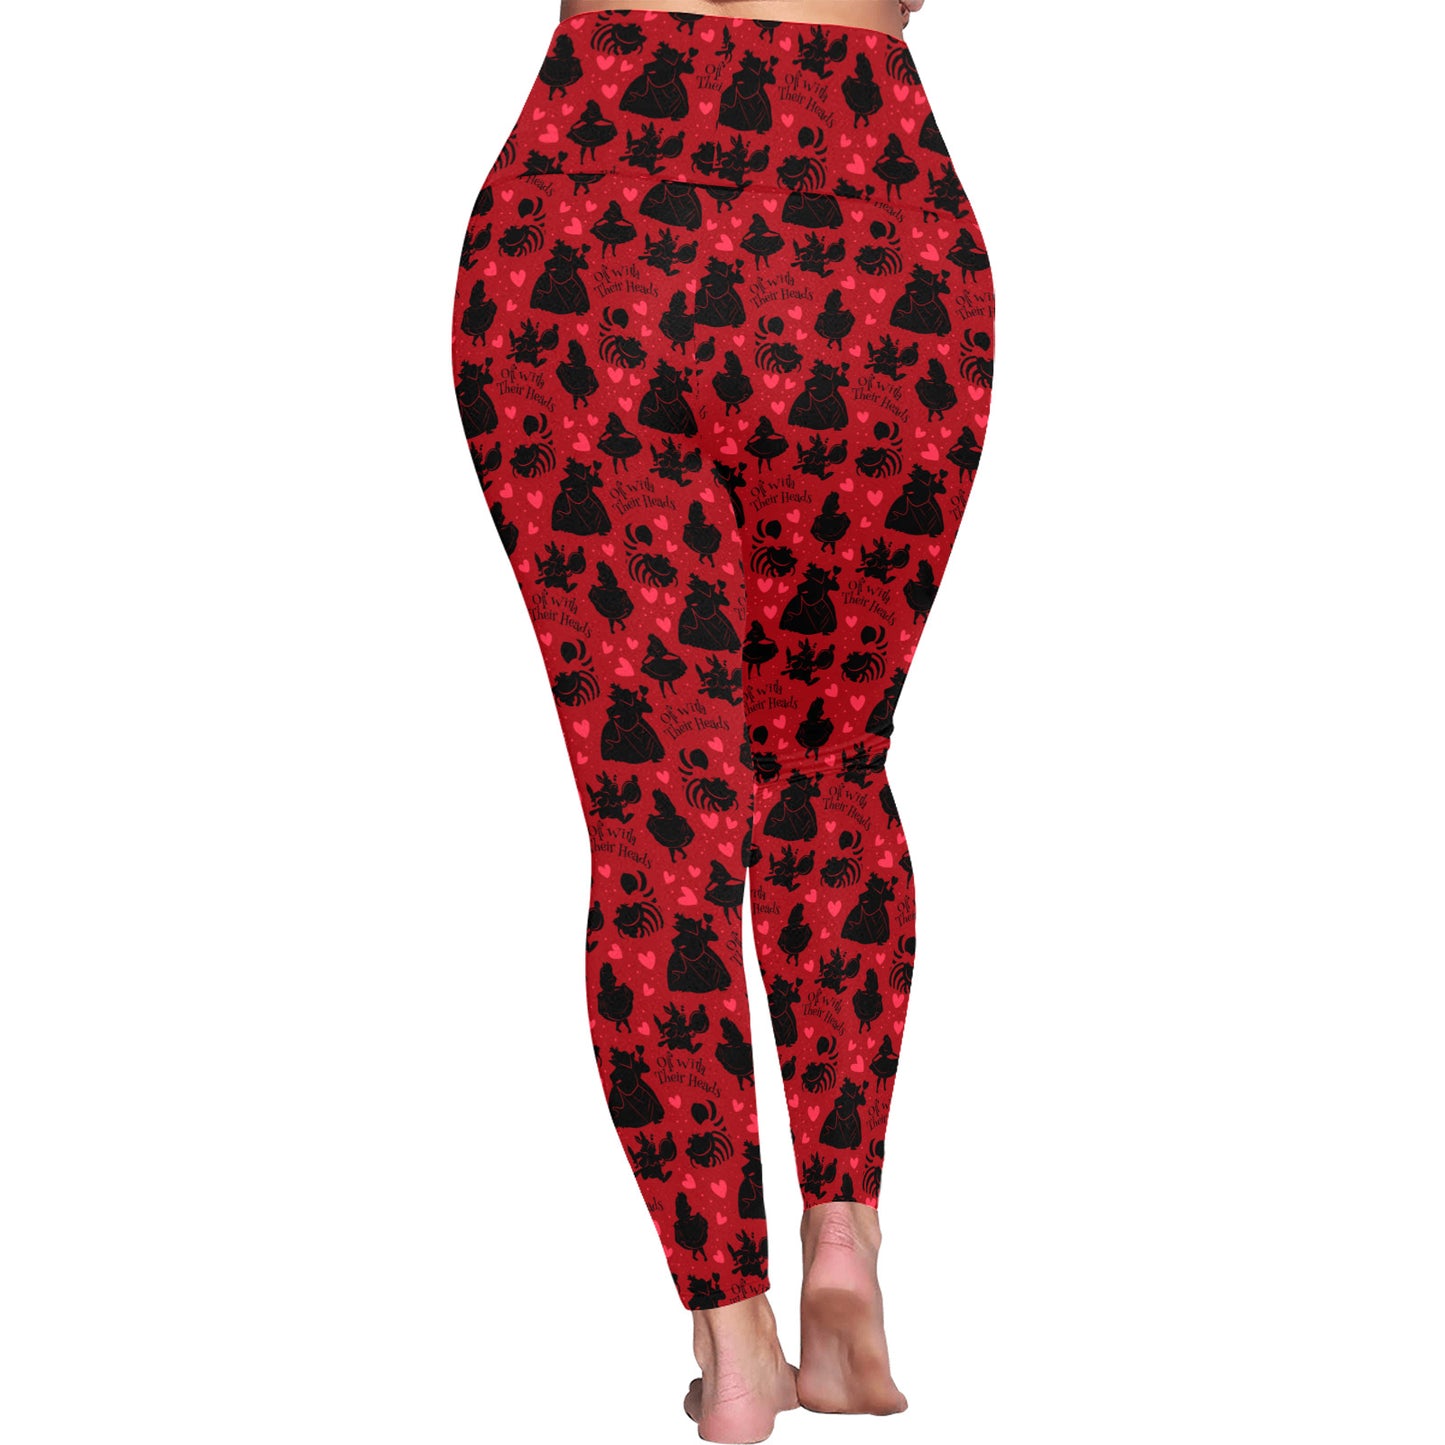 Off With Their Heads Women's Plus Size Athletic Leggings